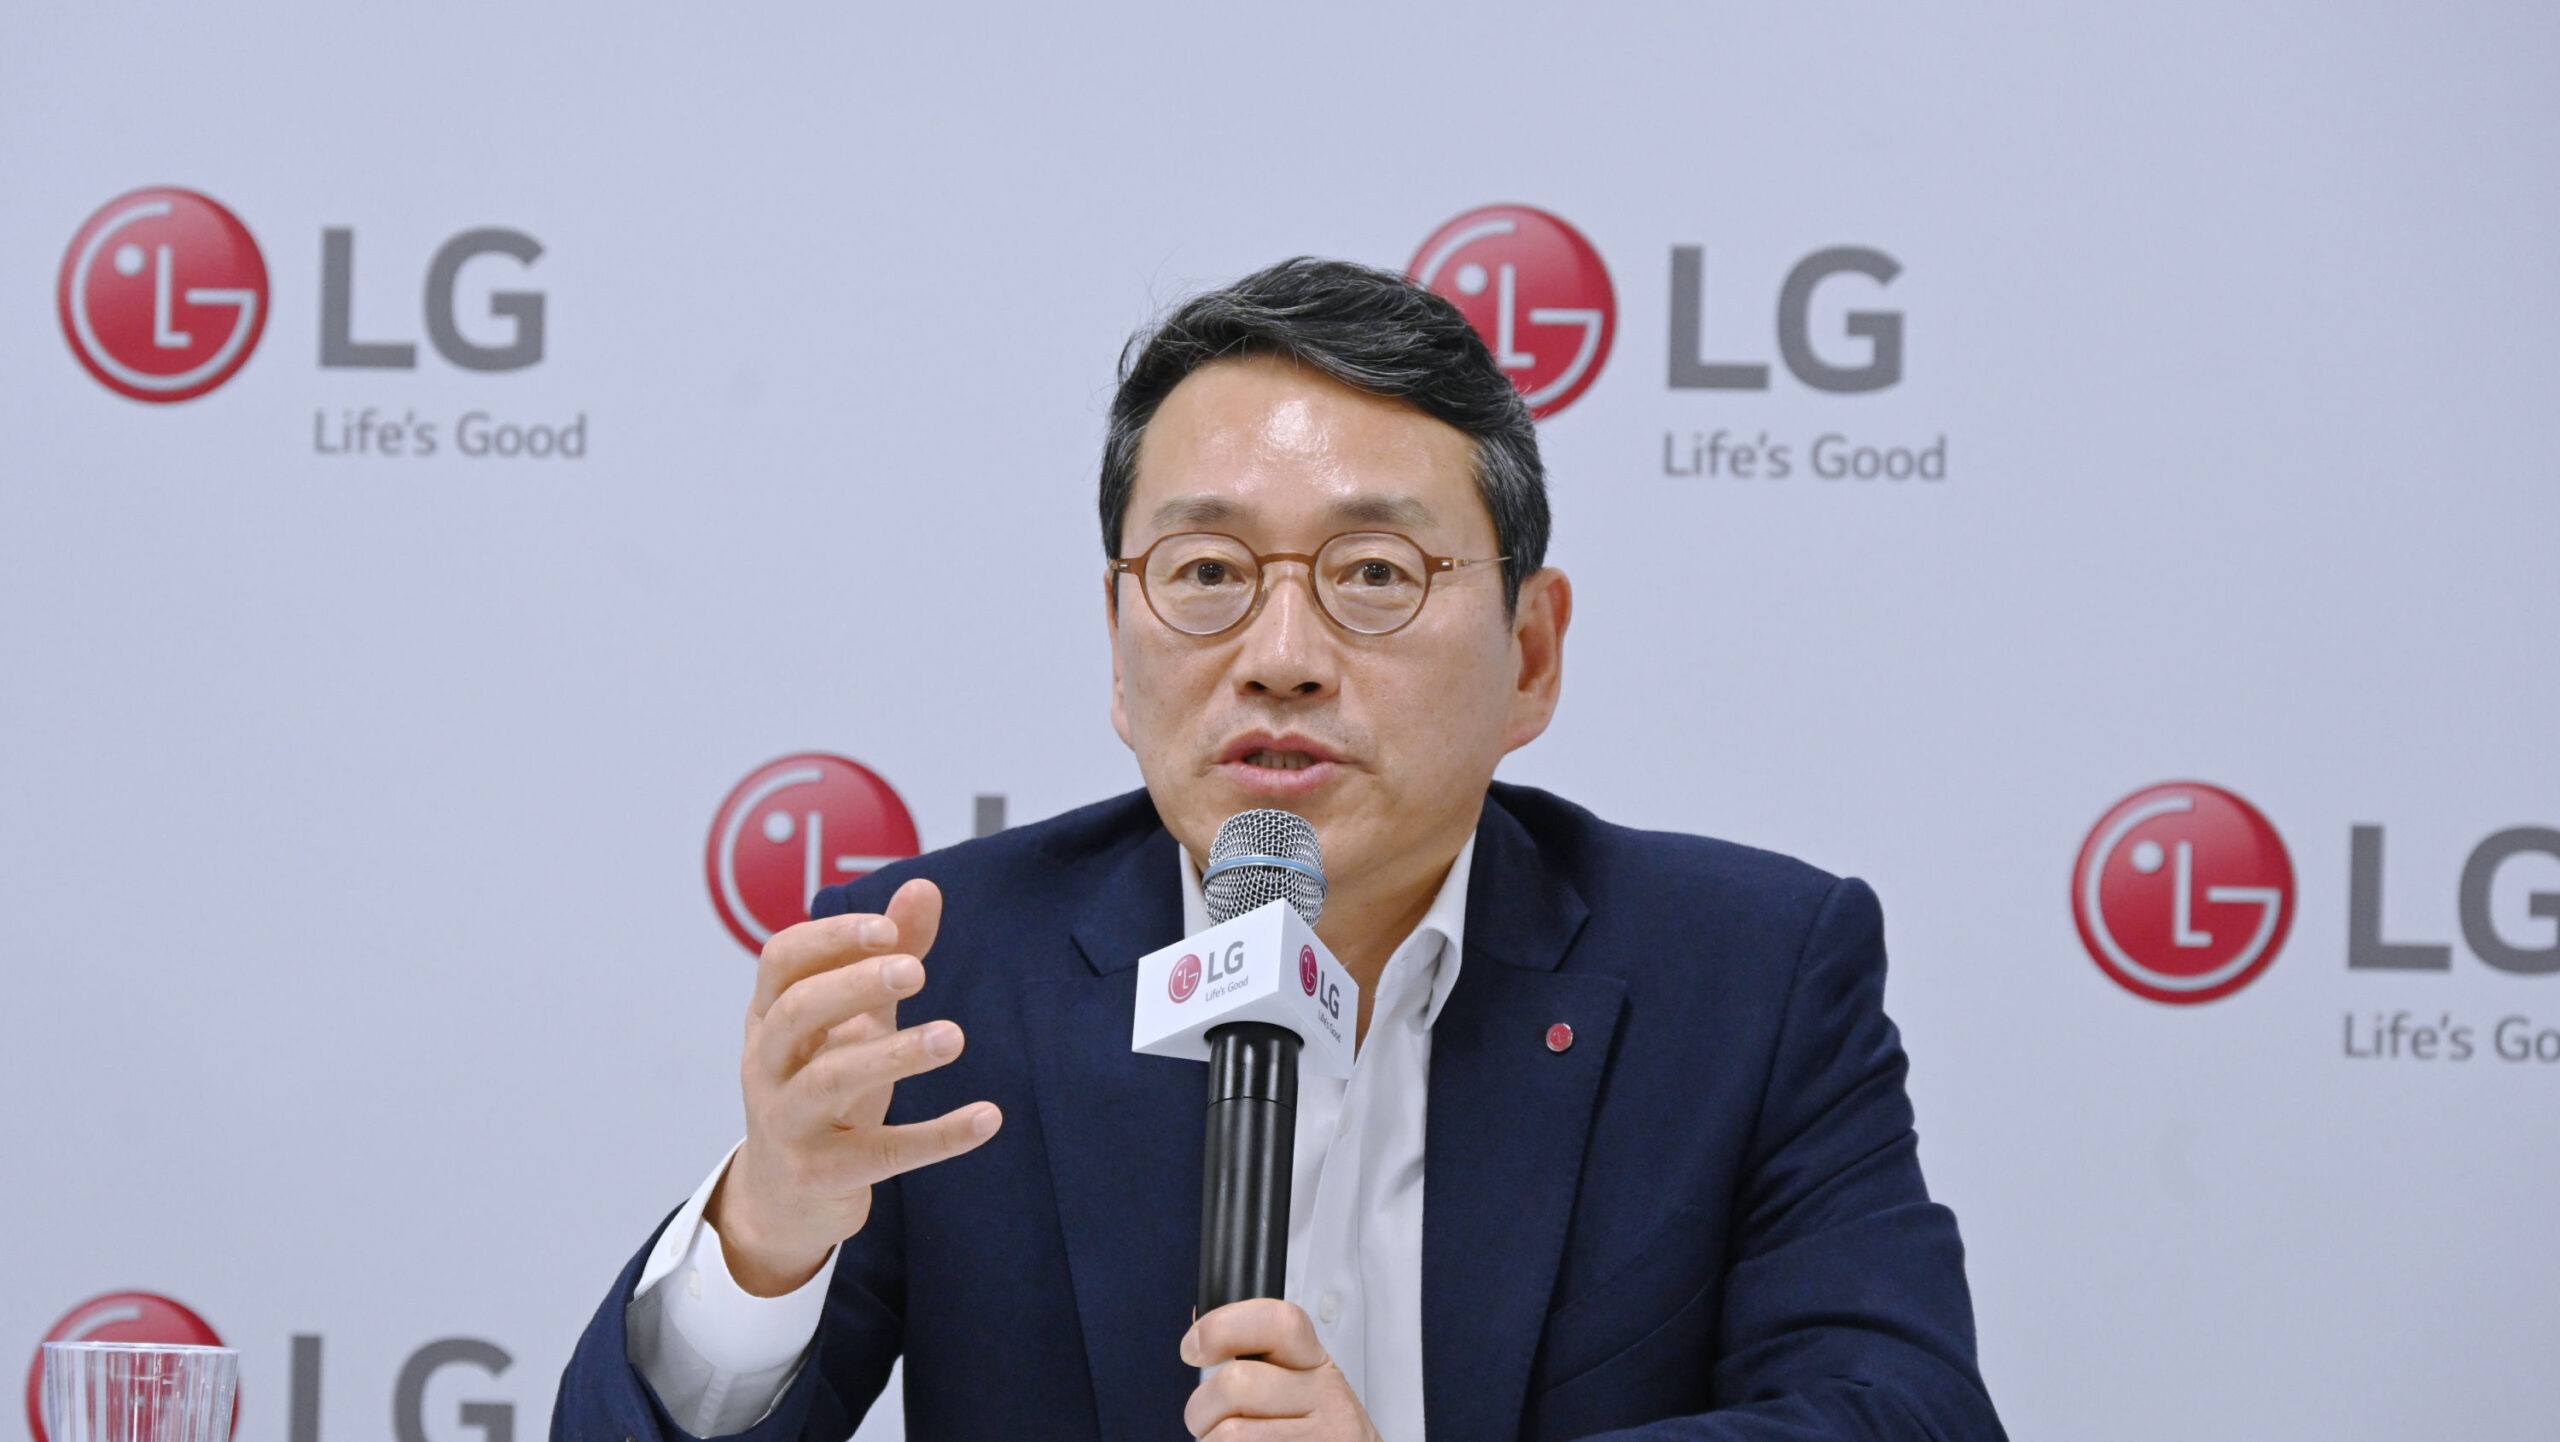 LG CEO and Key Executives Outline Directions To Diversify Business